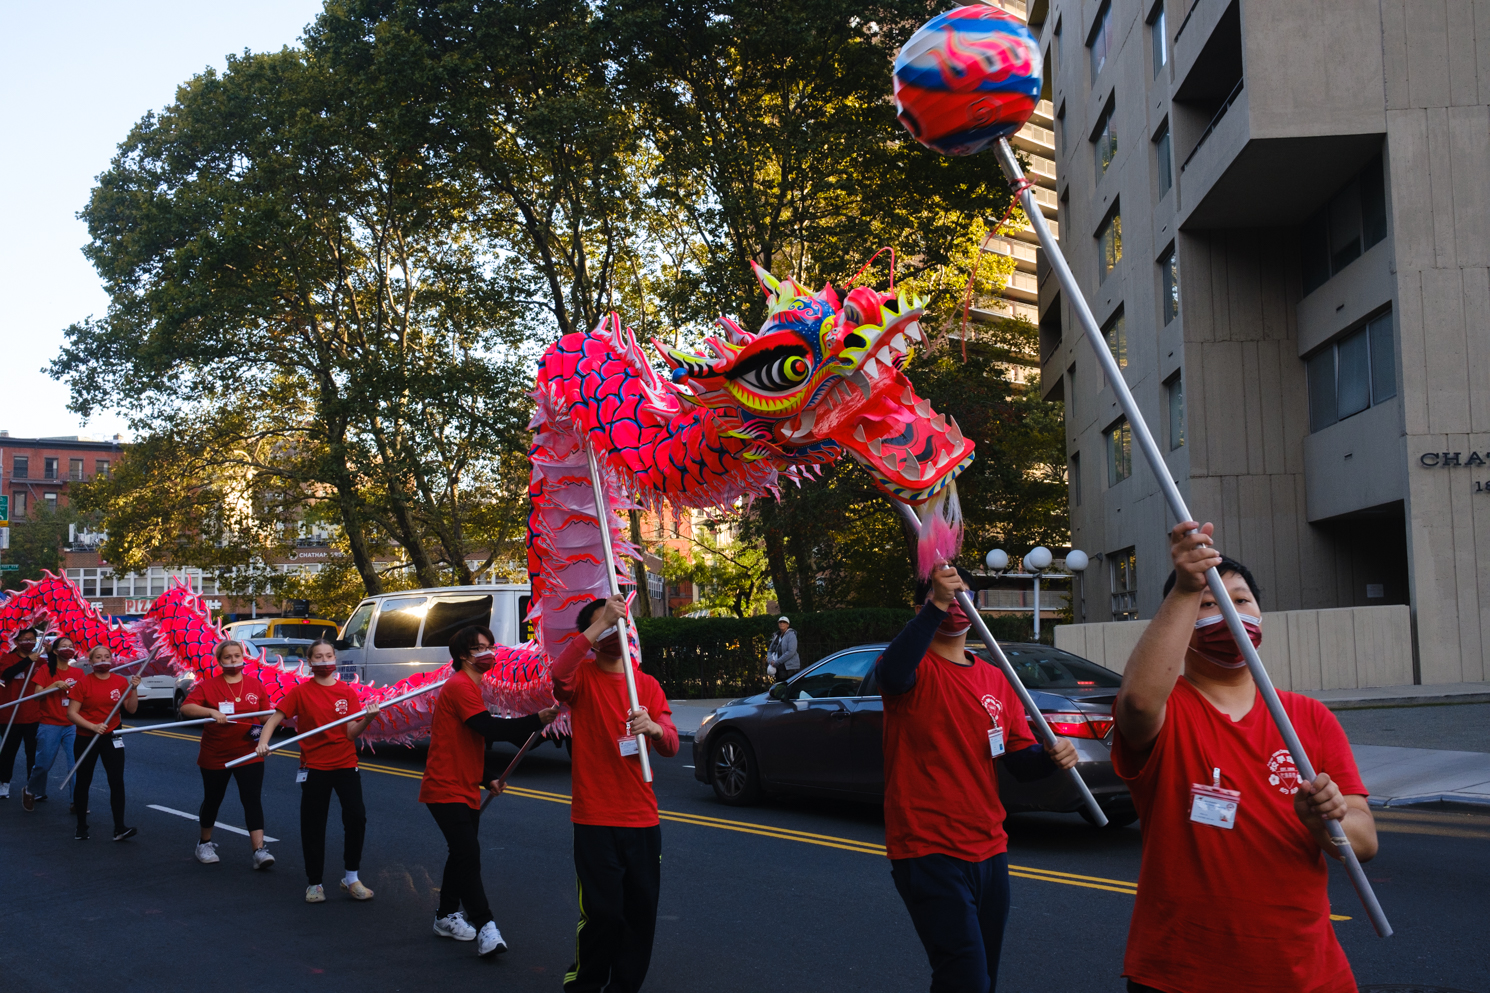 A dancing dragon marches through the parade on Worth Street.